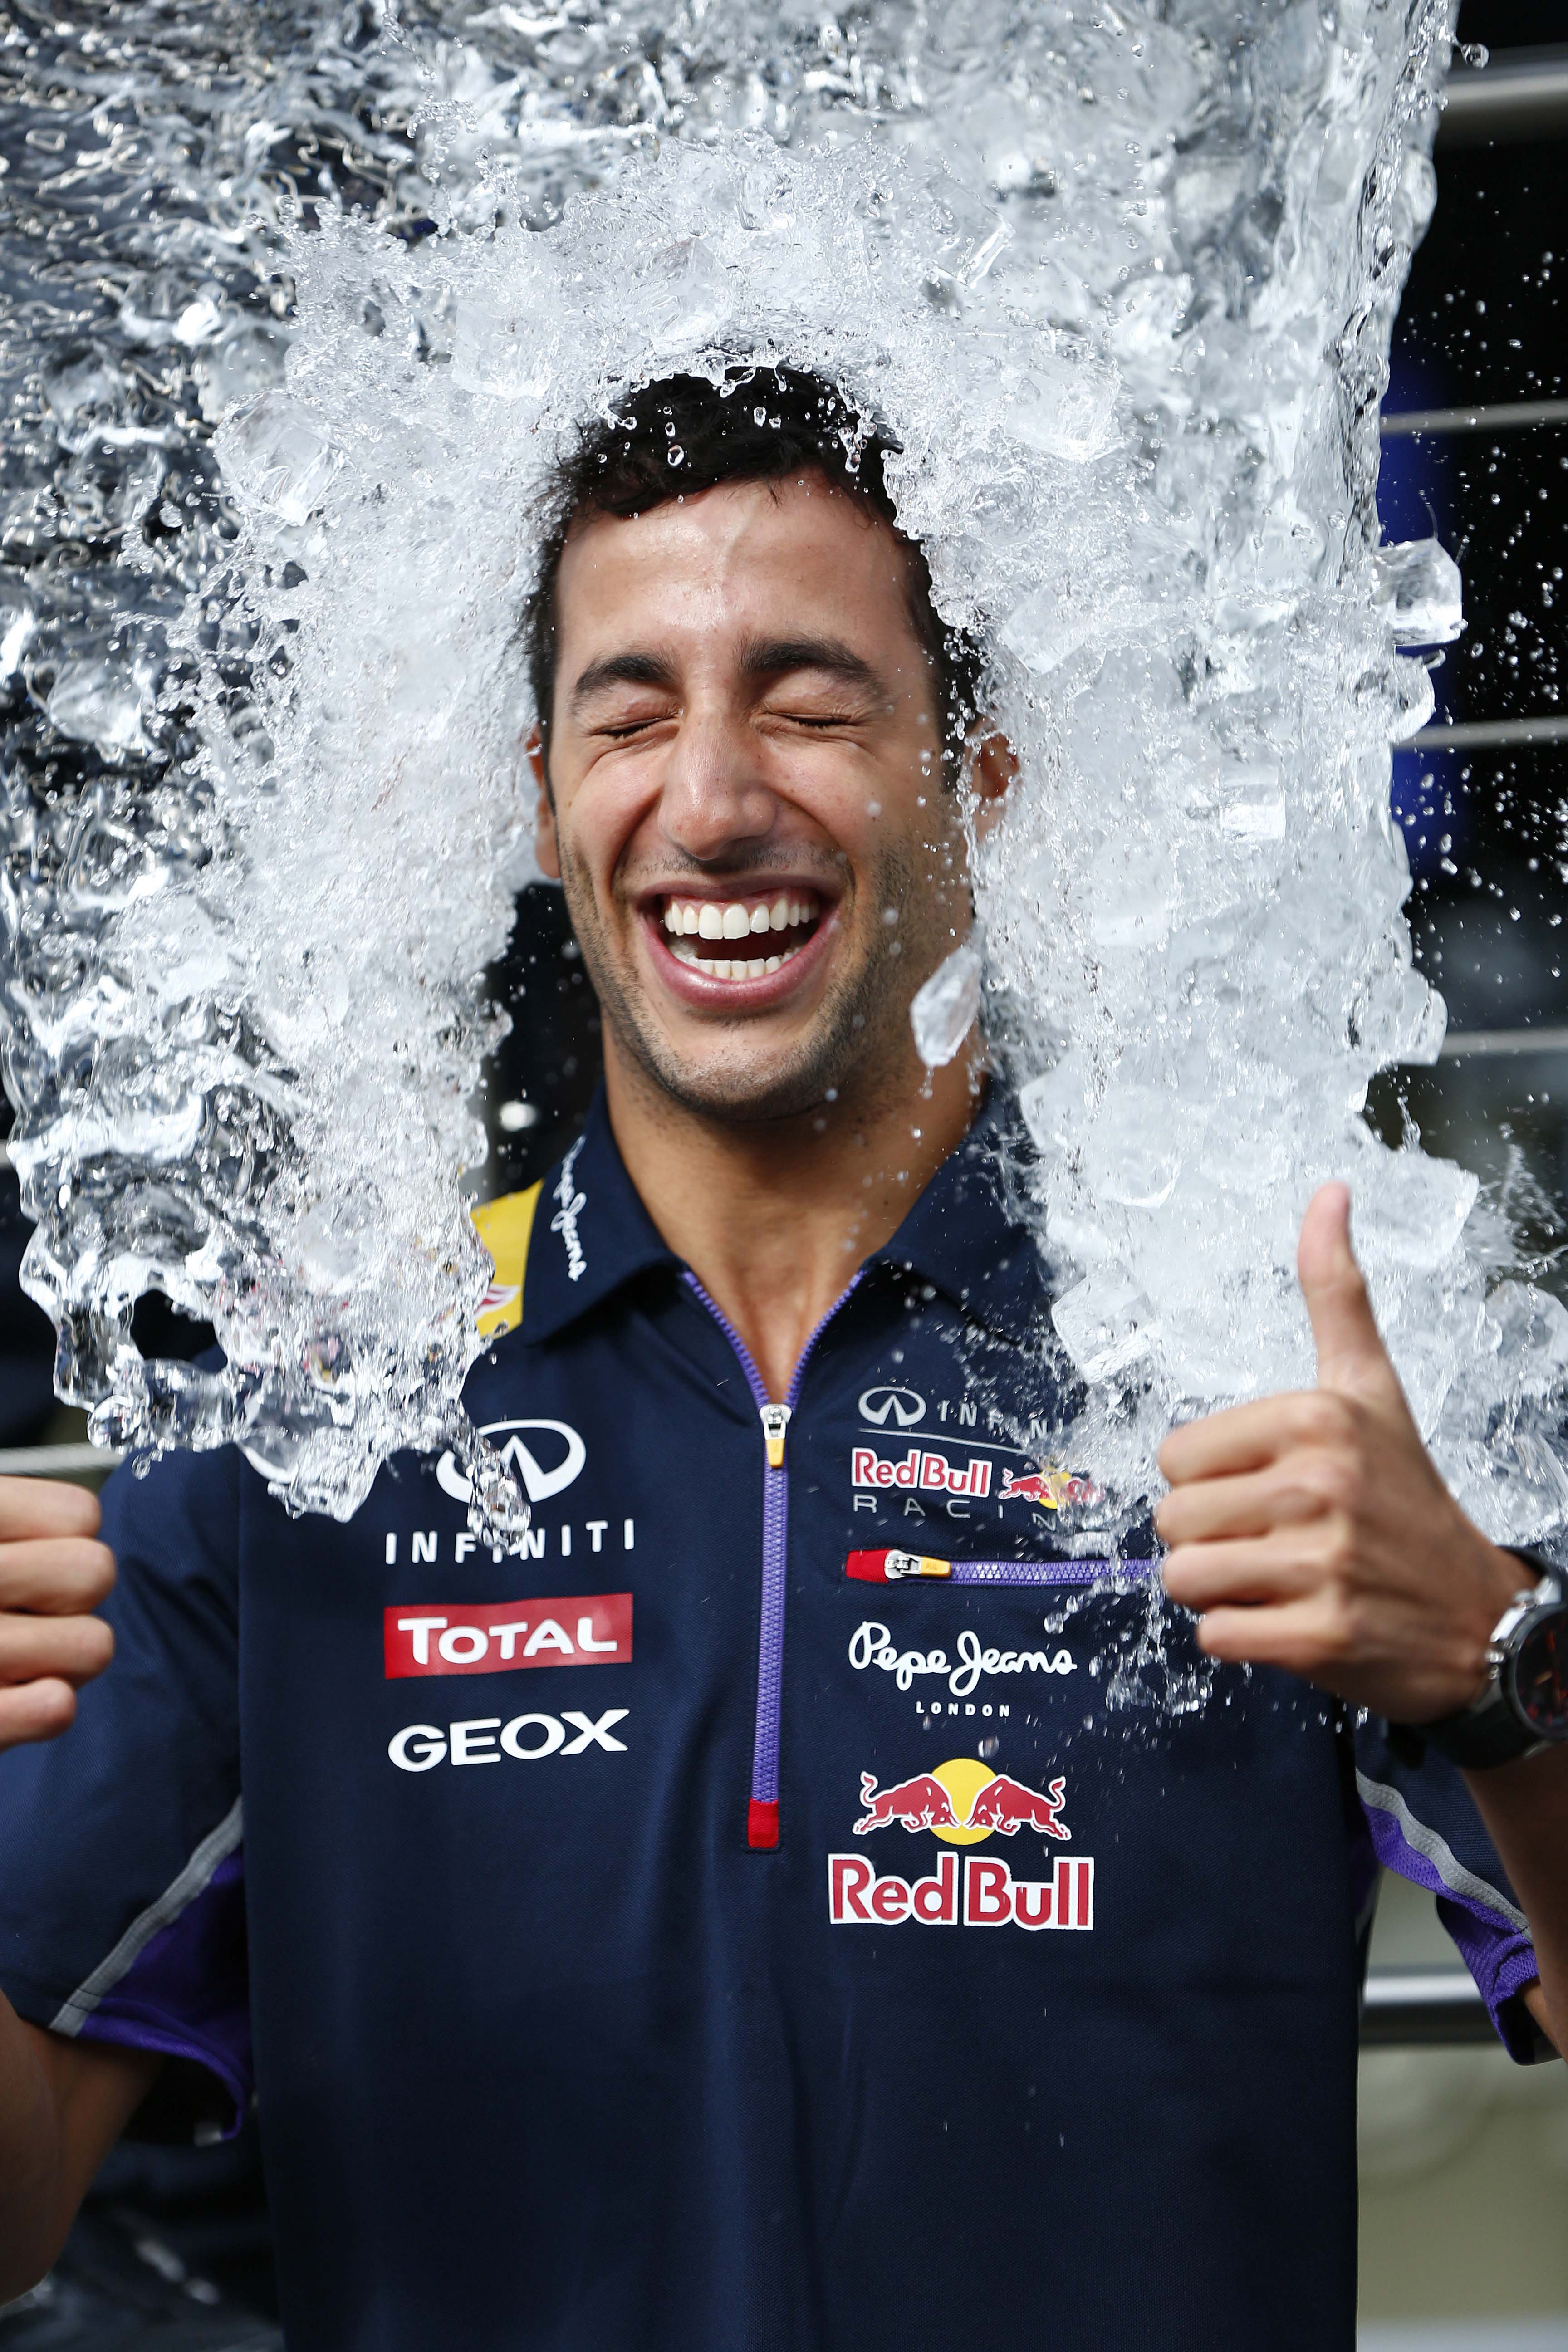 PHOTOS: The Sweetest Shots from the 2014 Belgian Grand Prix